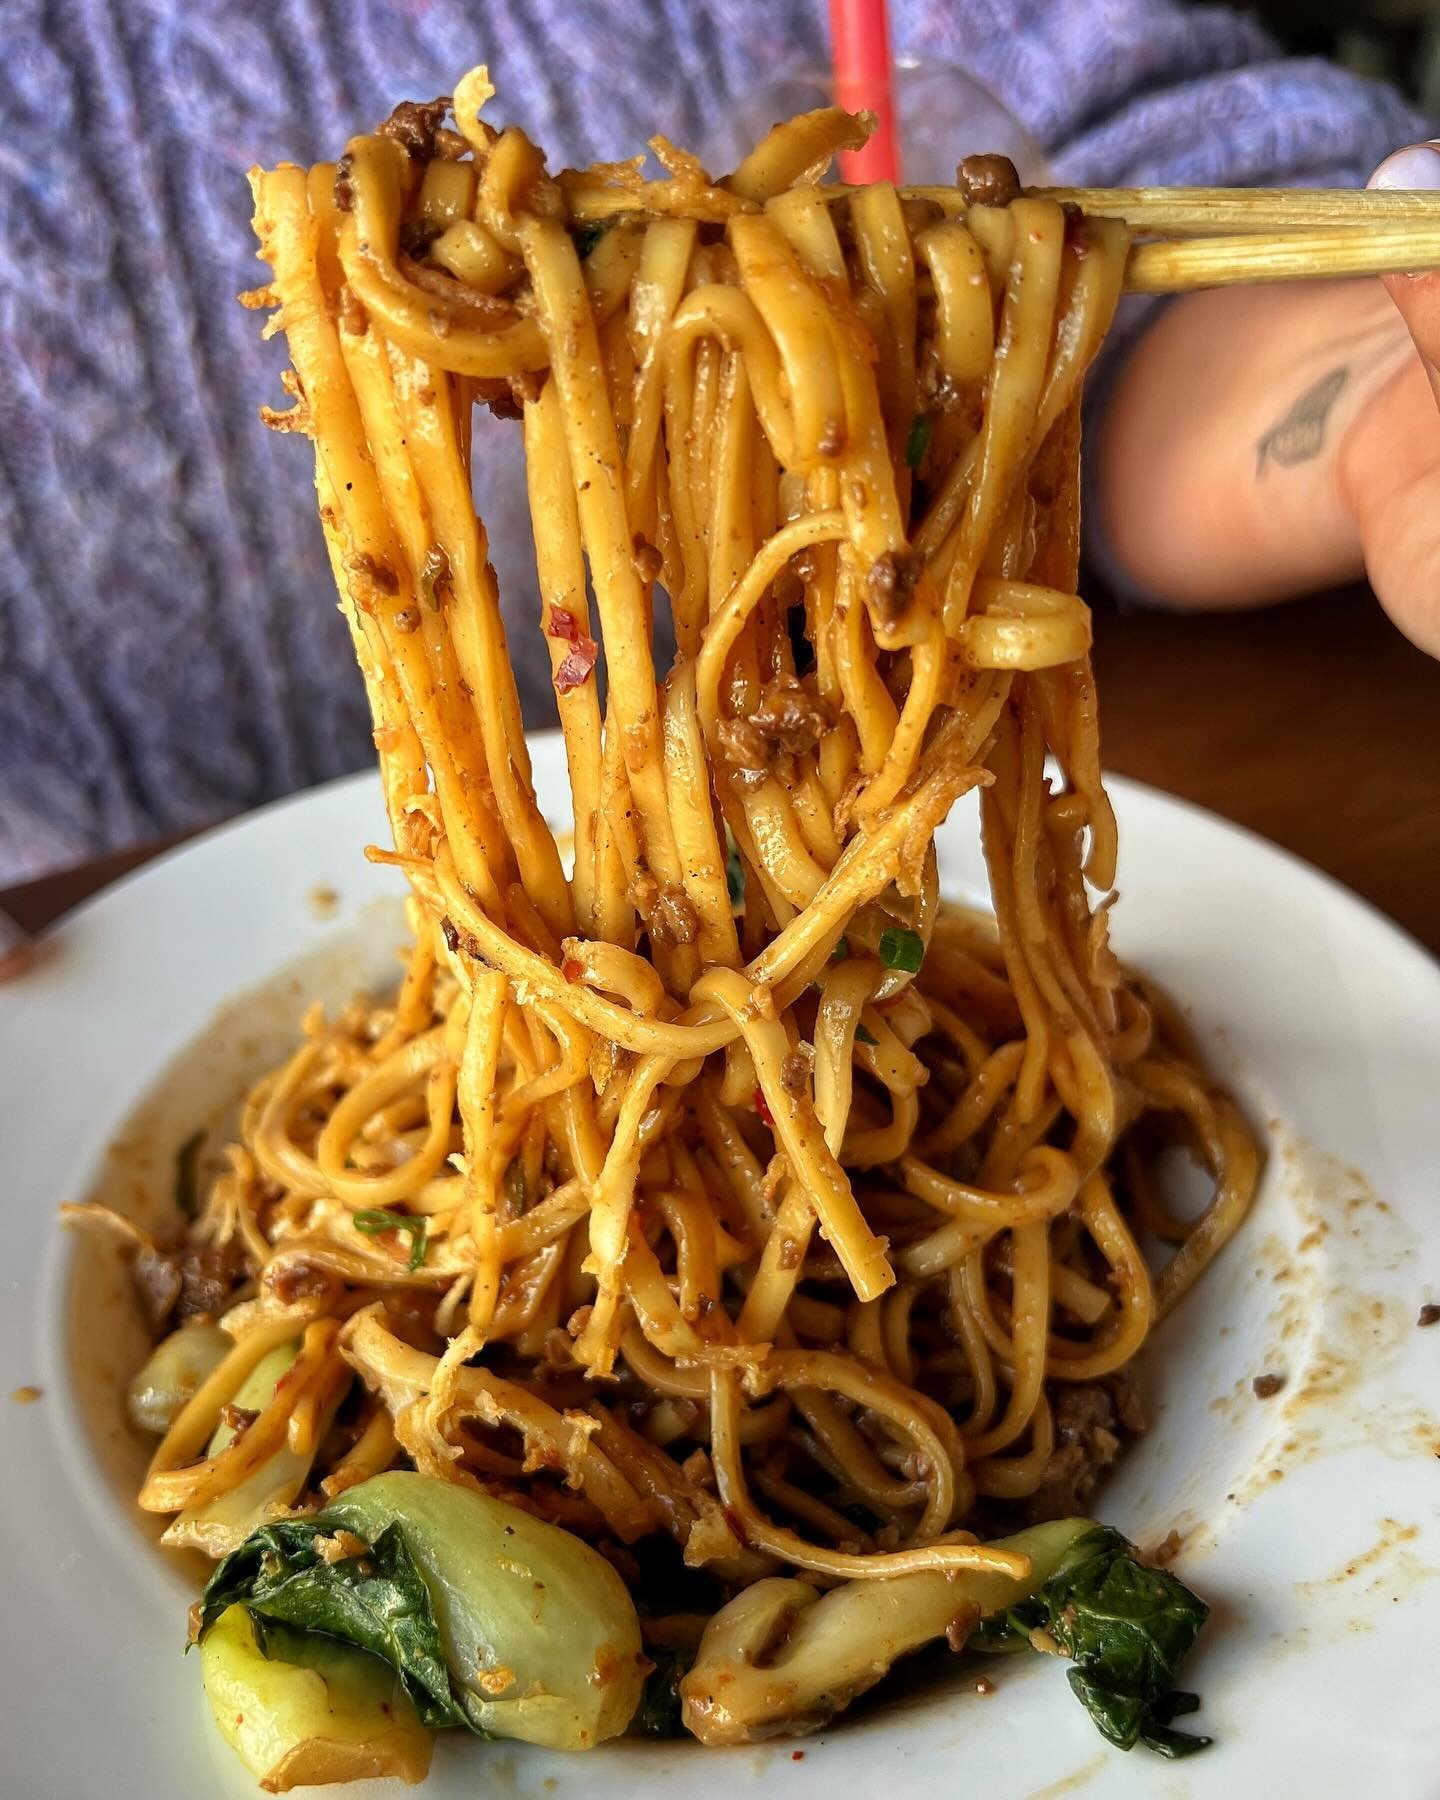 Satisfy your tastebuds on our delicious DAN DAN NOODLES! 🍜🔥😋
#ROGUEPANDA #NYC
📍ROOFTOP LEVEL at @timeoutmarket!
🧋 Visit our sister restaurant @the.rogue.boba!